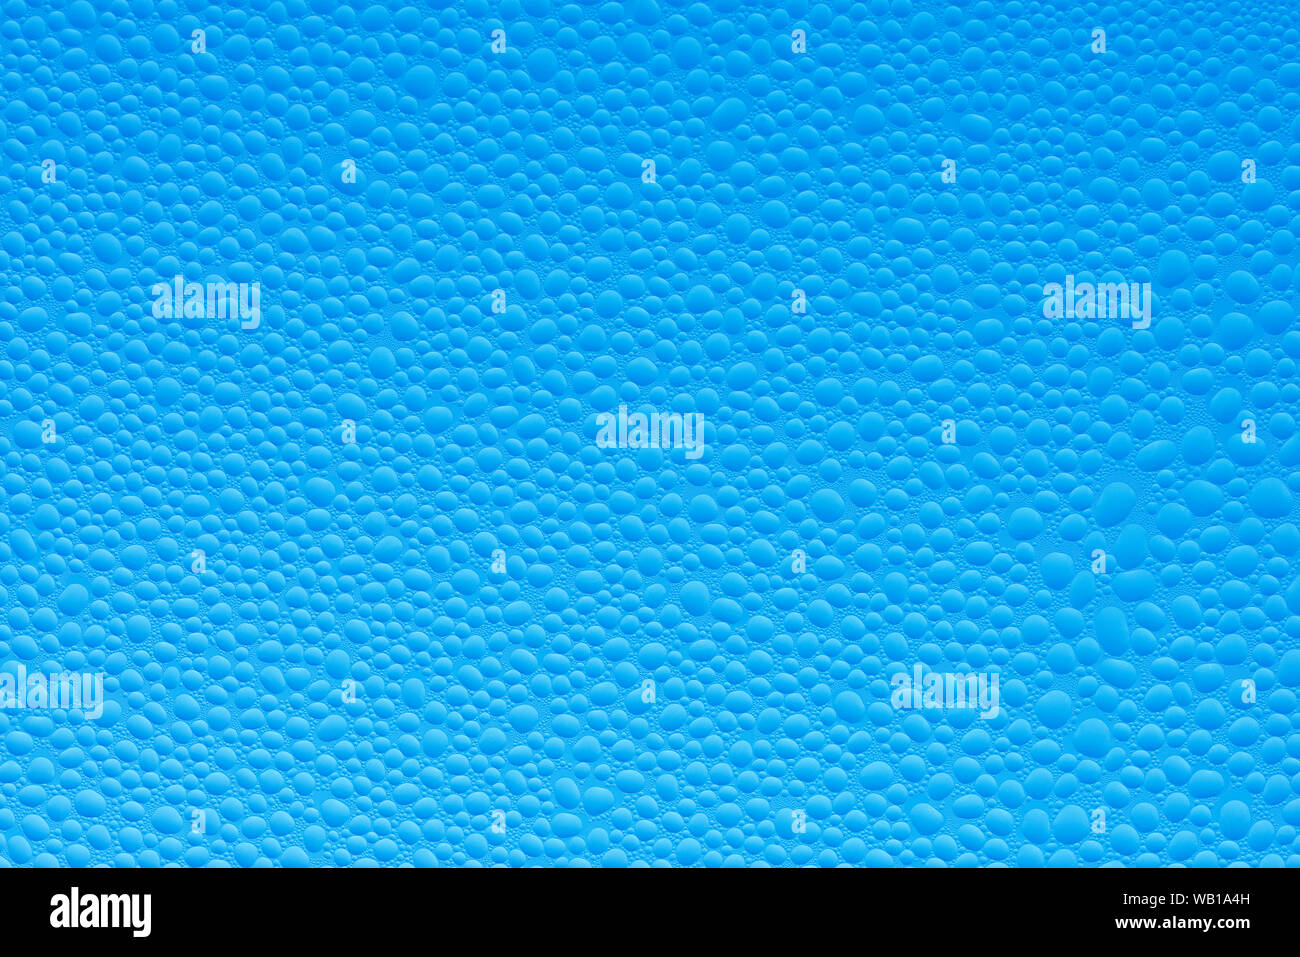 Drops of water on a glass window of a car against clear blue sky, close-up Stock Photo